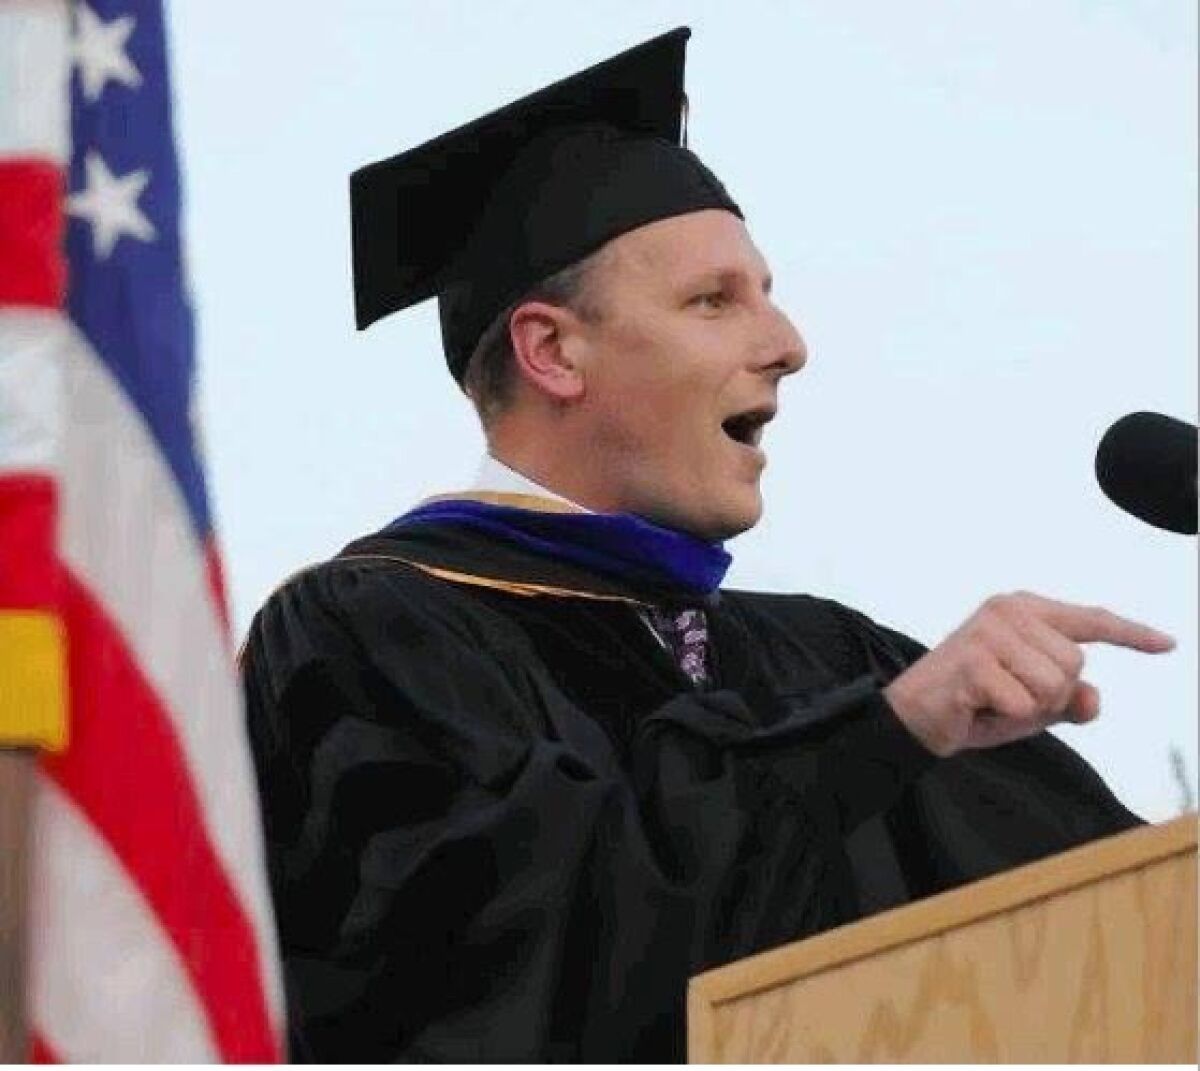 Scott Lay speaks at at Pasadena City College's commencement in 2007